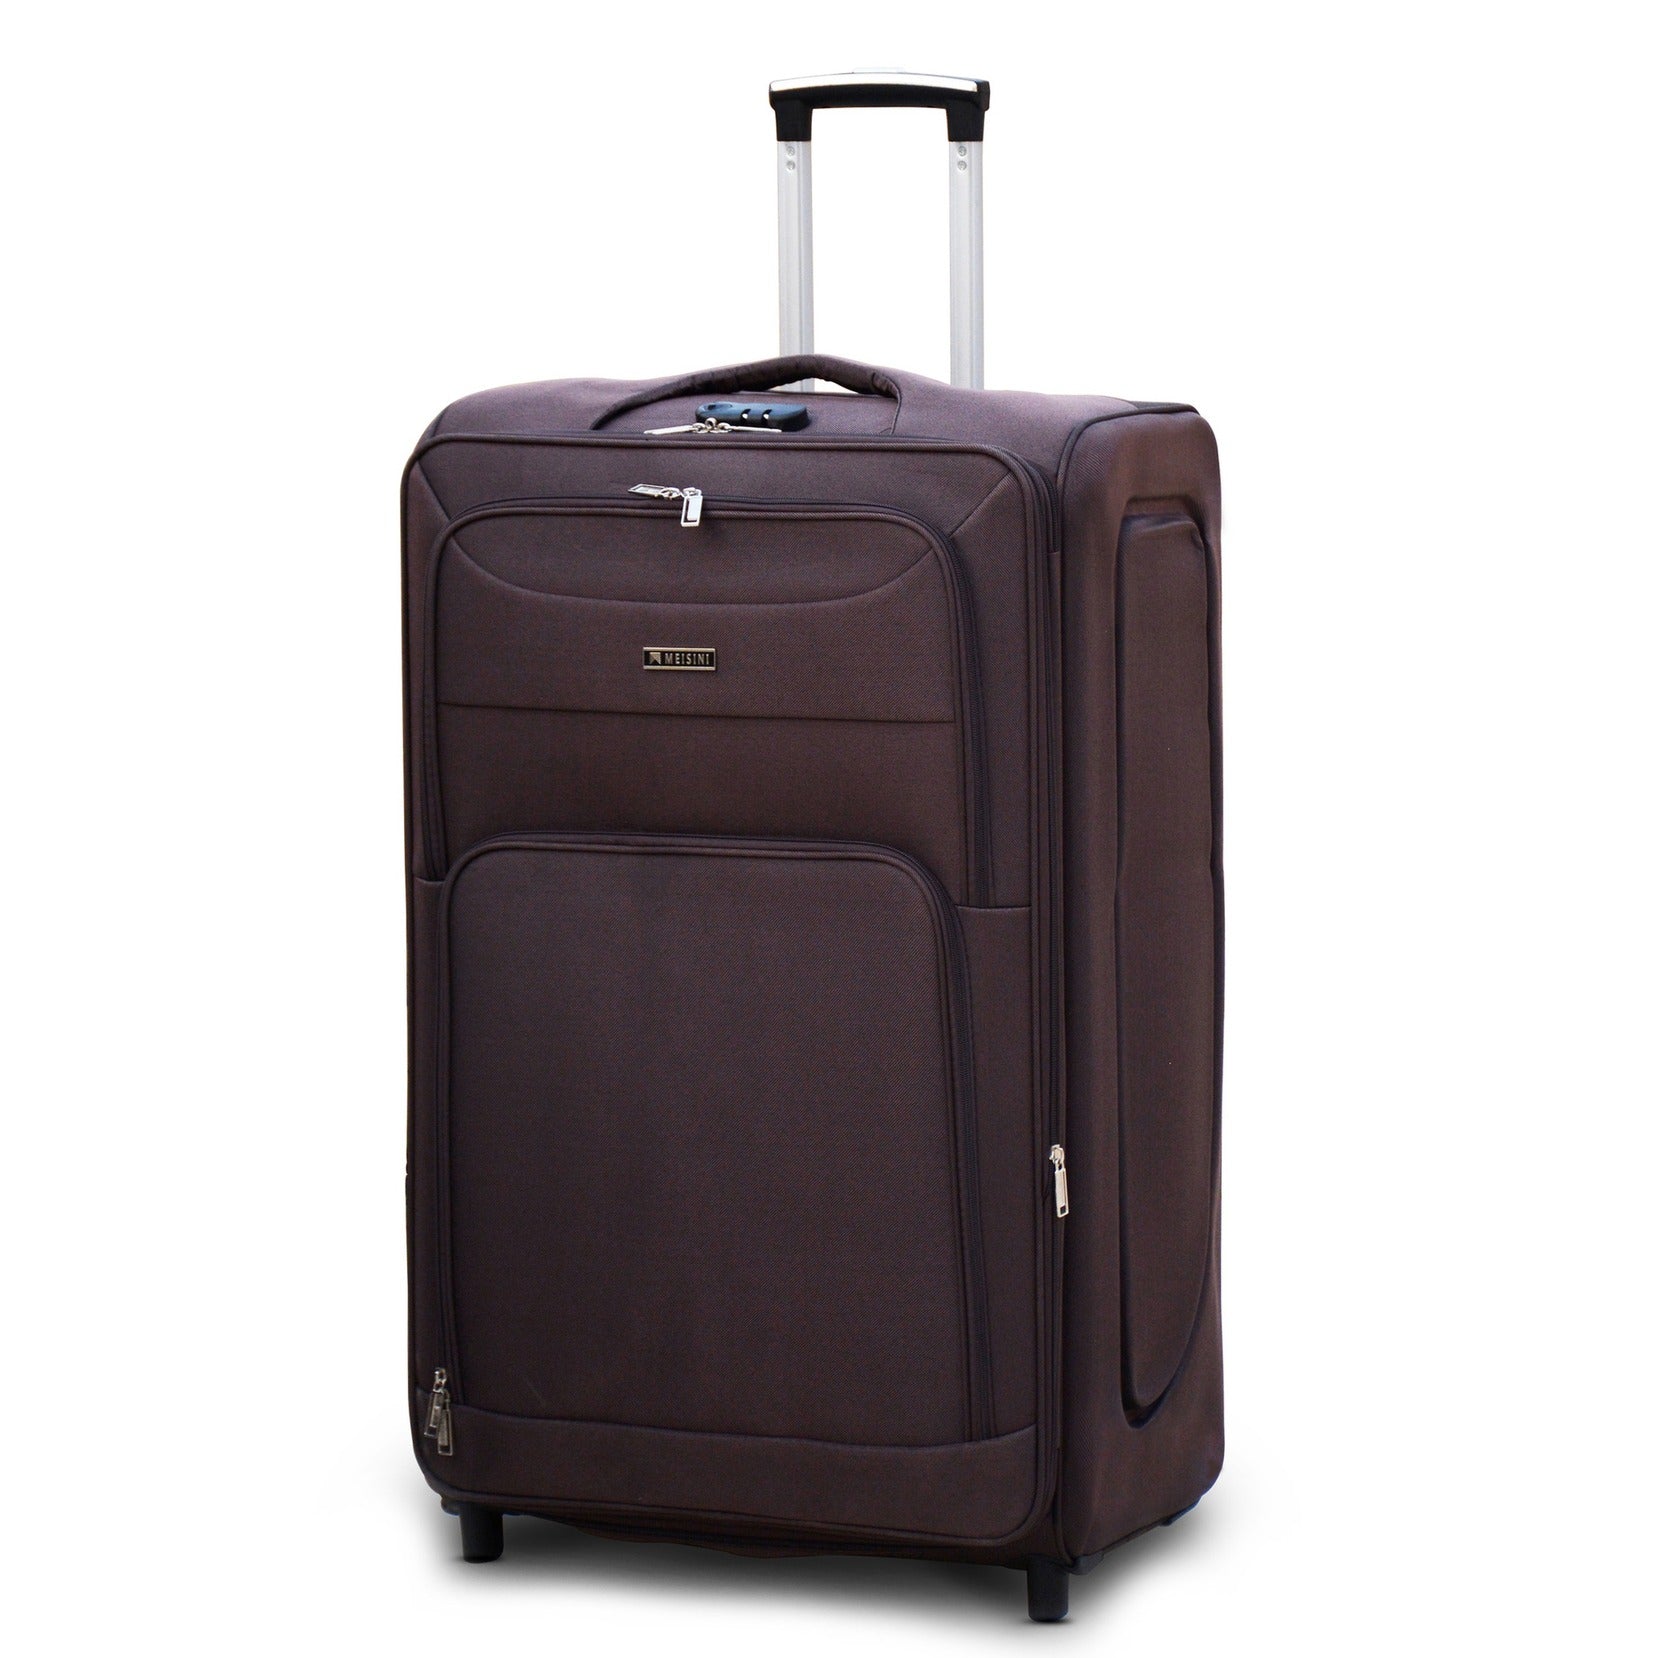  Coffee Colour LP 2 Wheel 0161 Lightweight Soft Material Luggage Bag Zaappy